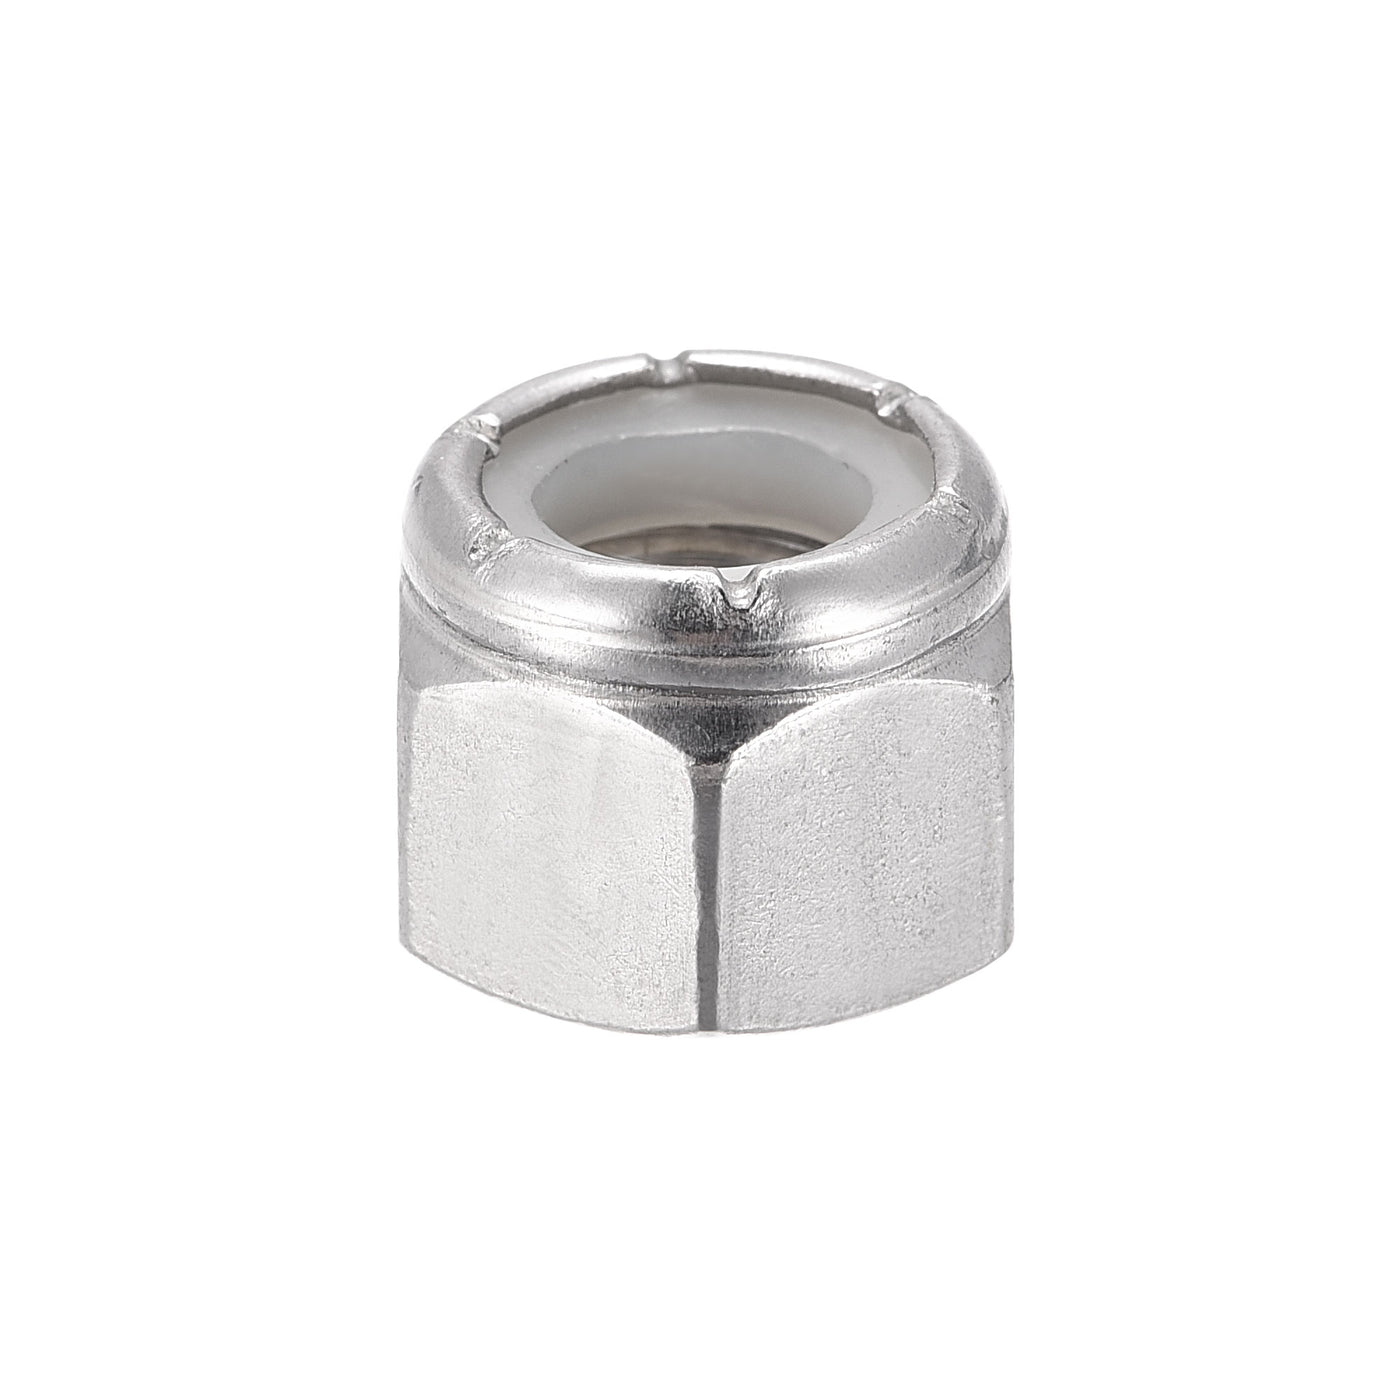 uxcell Uxcell 3/8-16 UNC Nylon Insert Hex Lock Nuts, 304 Stainless Steel, Plain Finish, 50pcs